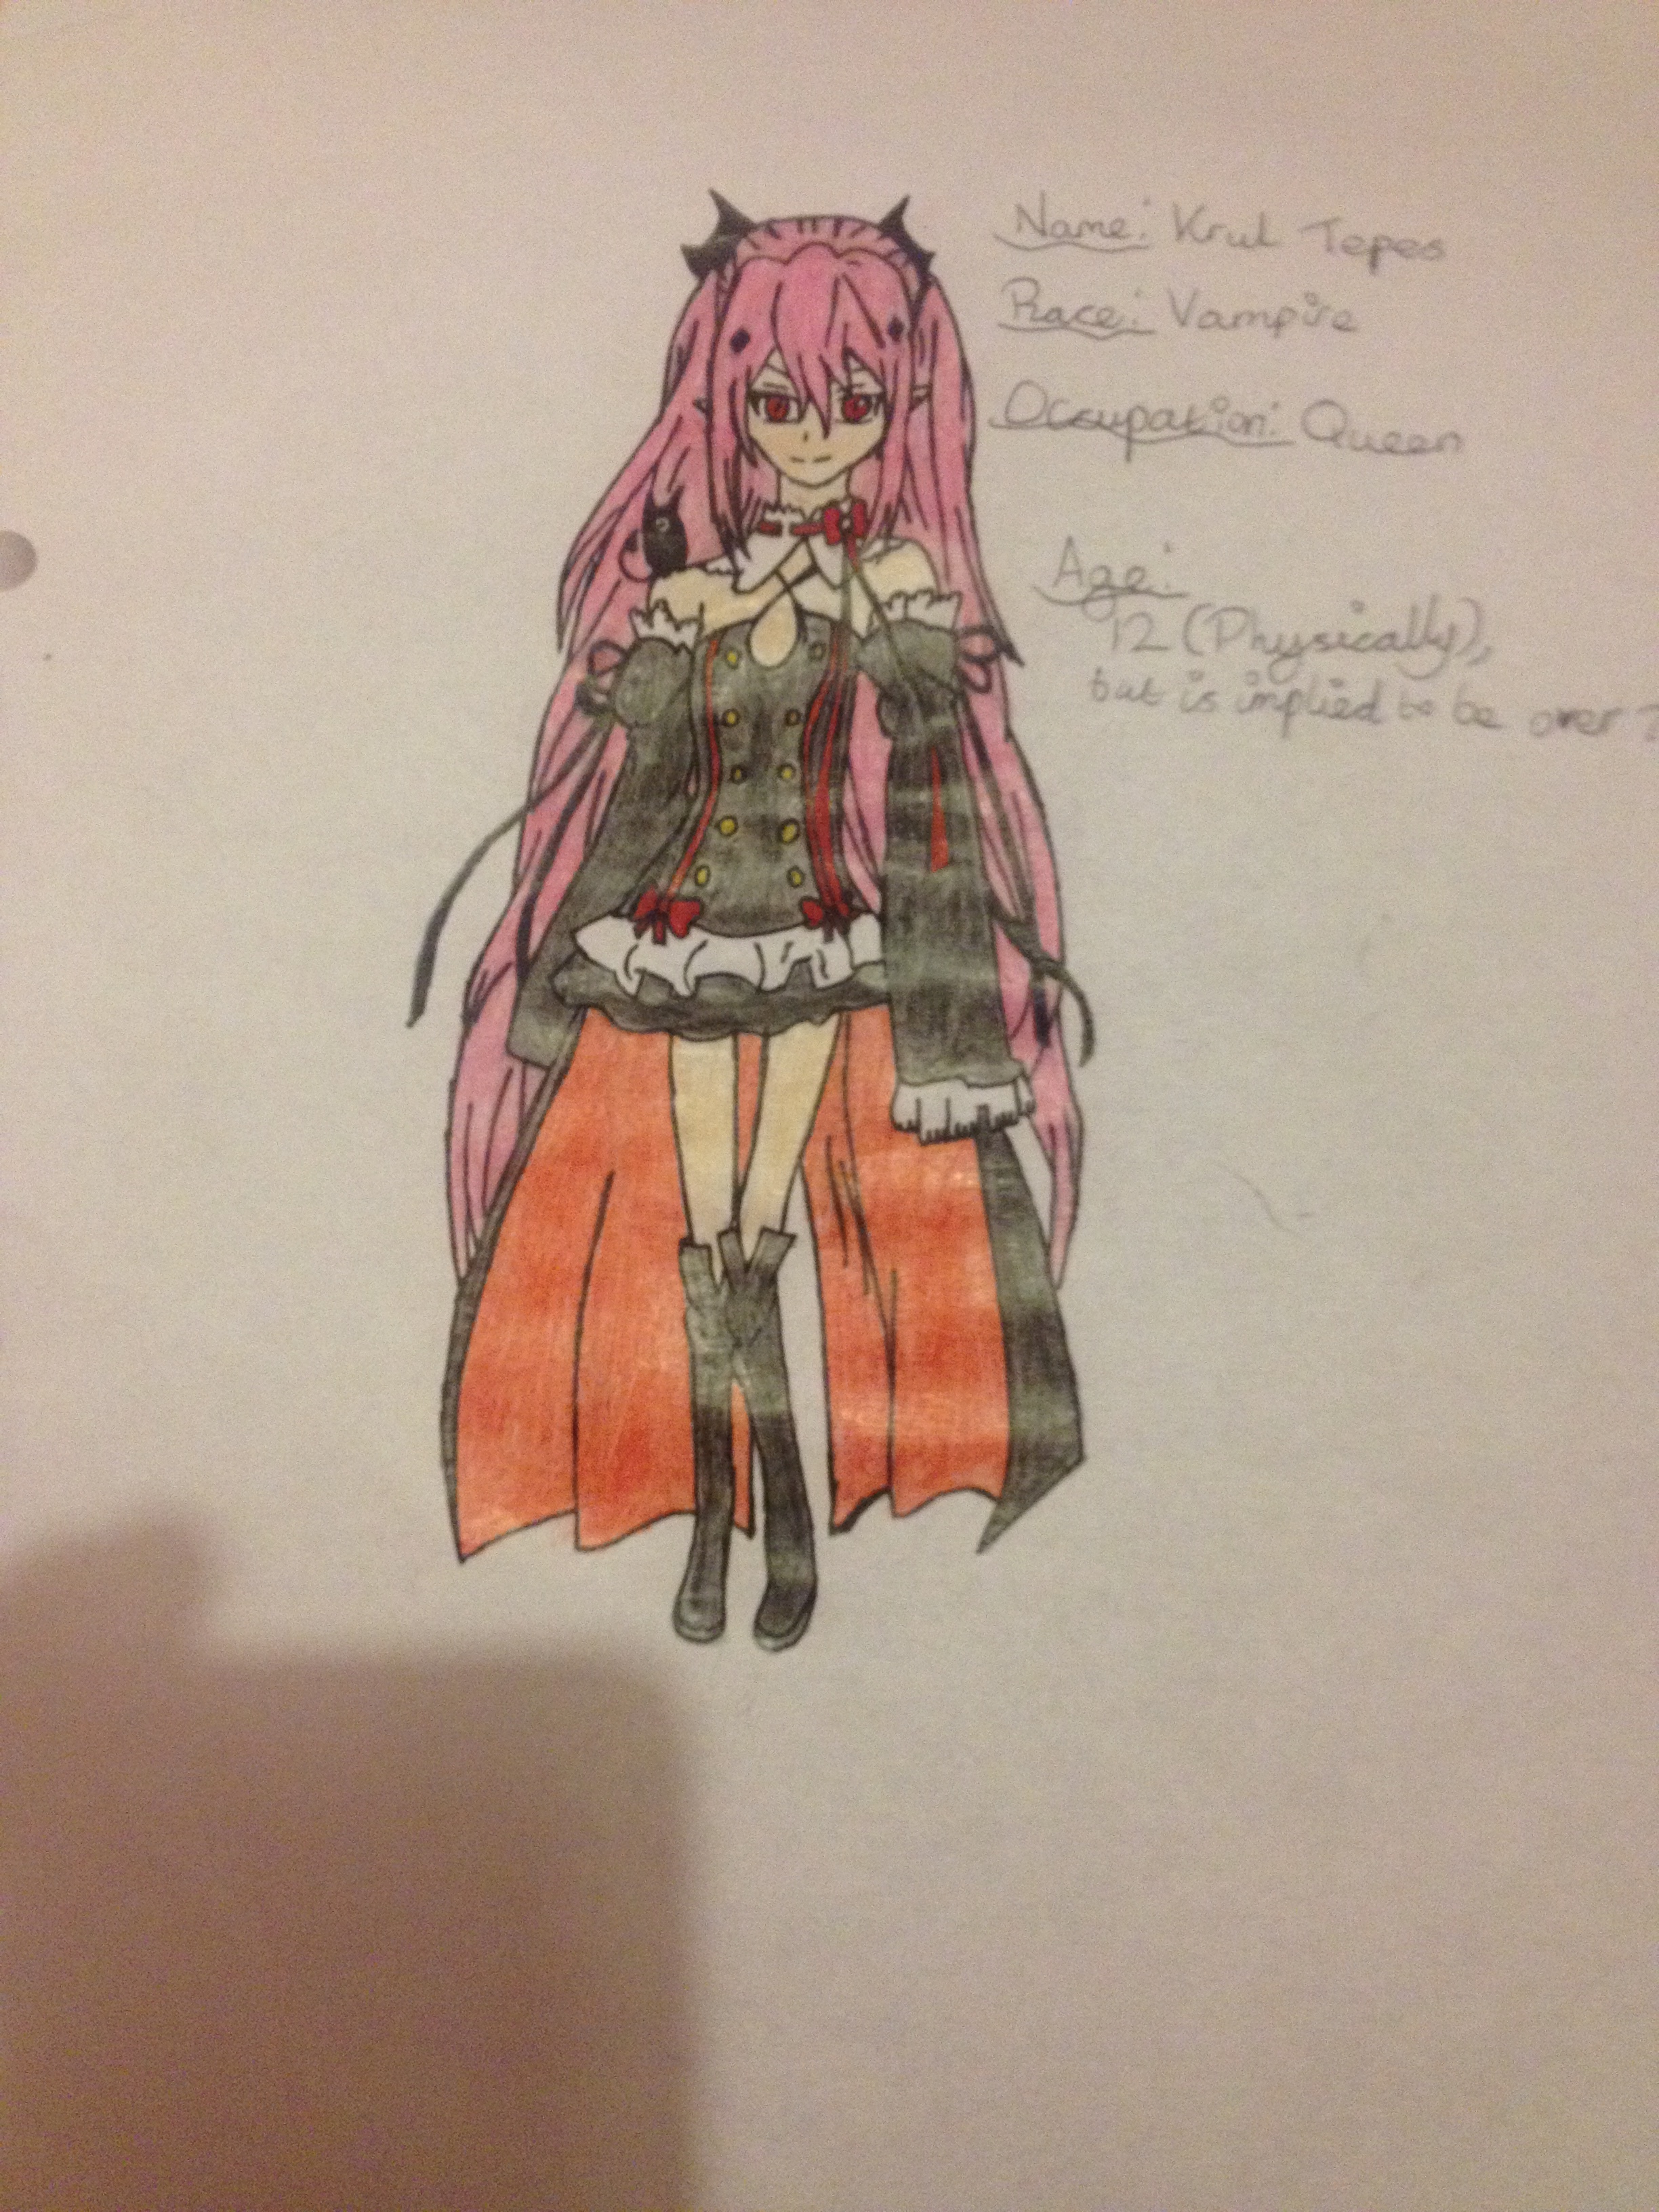 Krul Tepes Seraph of the end anime character by sophiej021 on DeviantArt